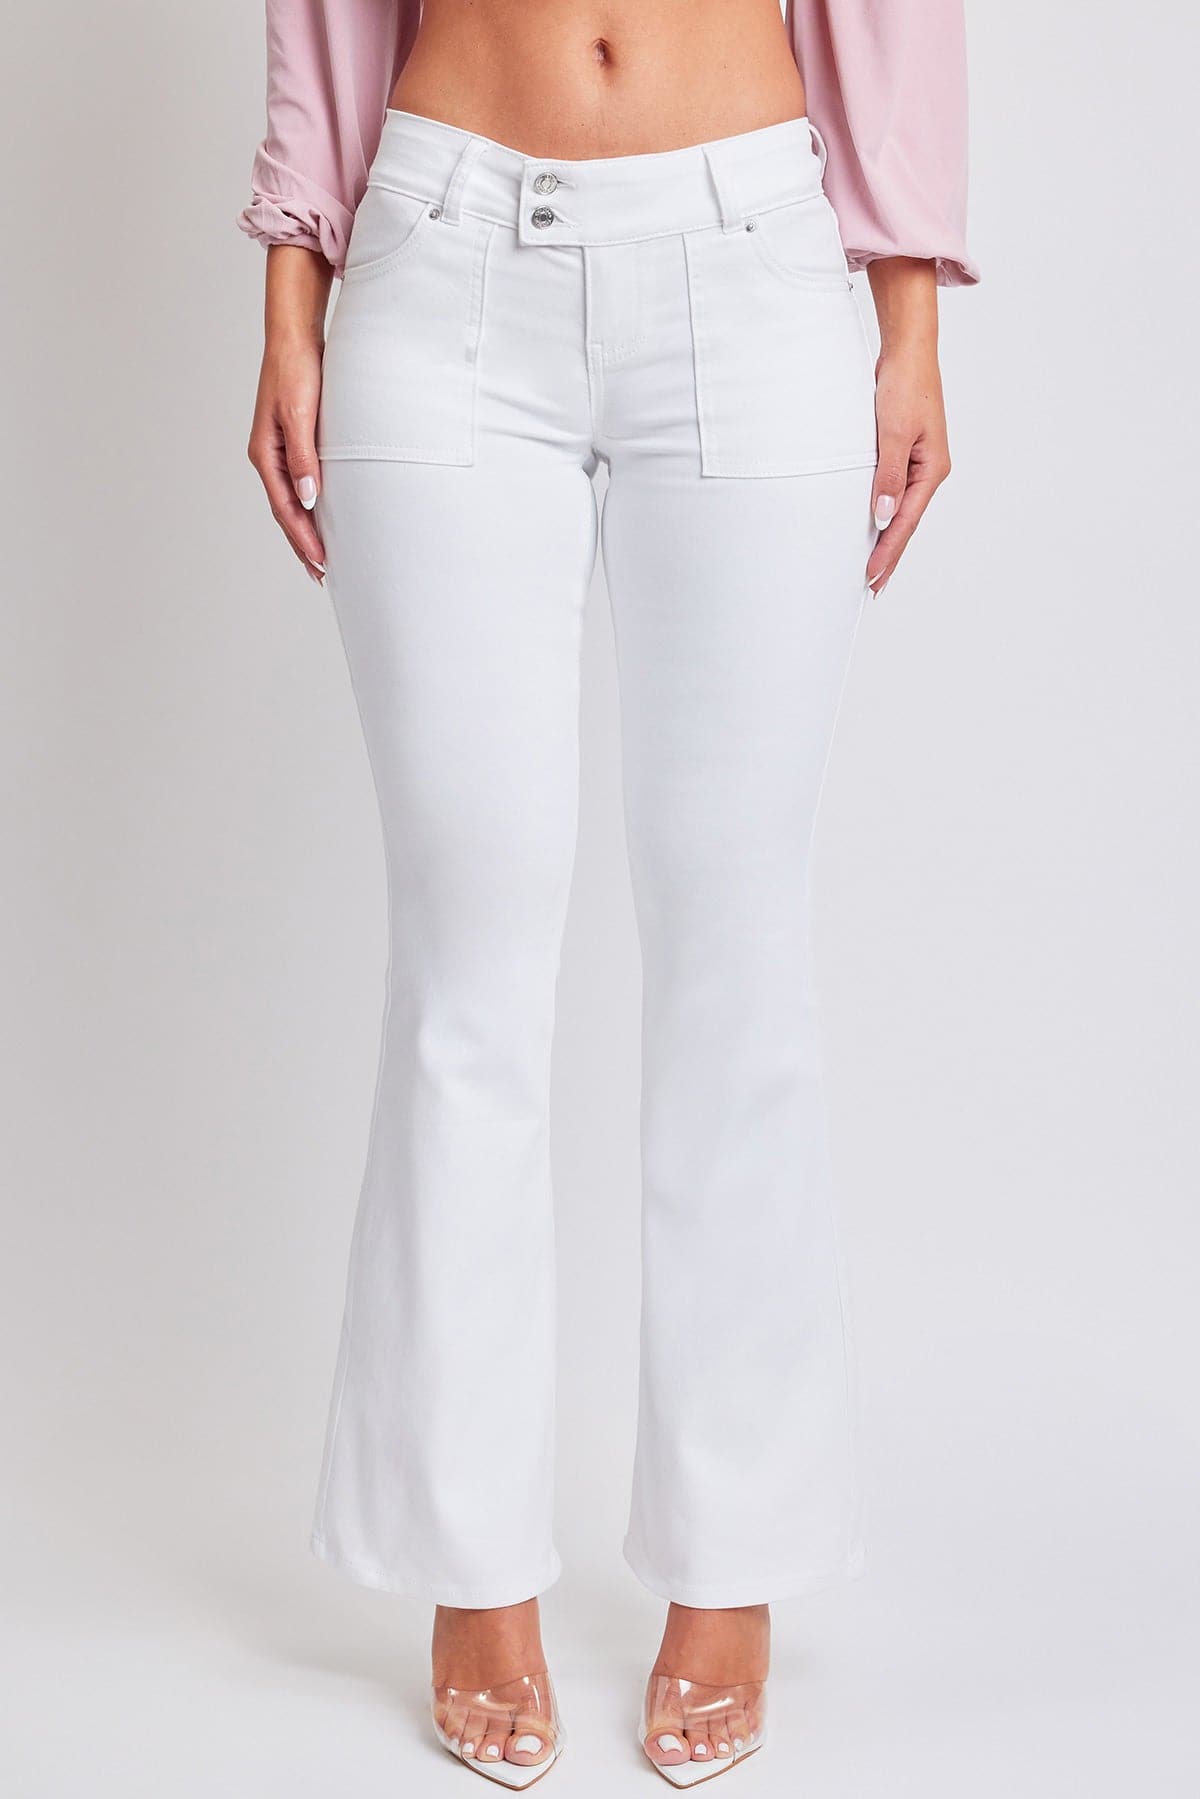 Women's Flare Featuring Flap Back Pocket Jeans